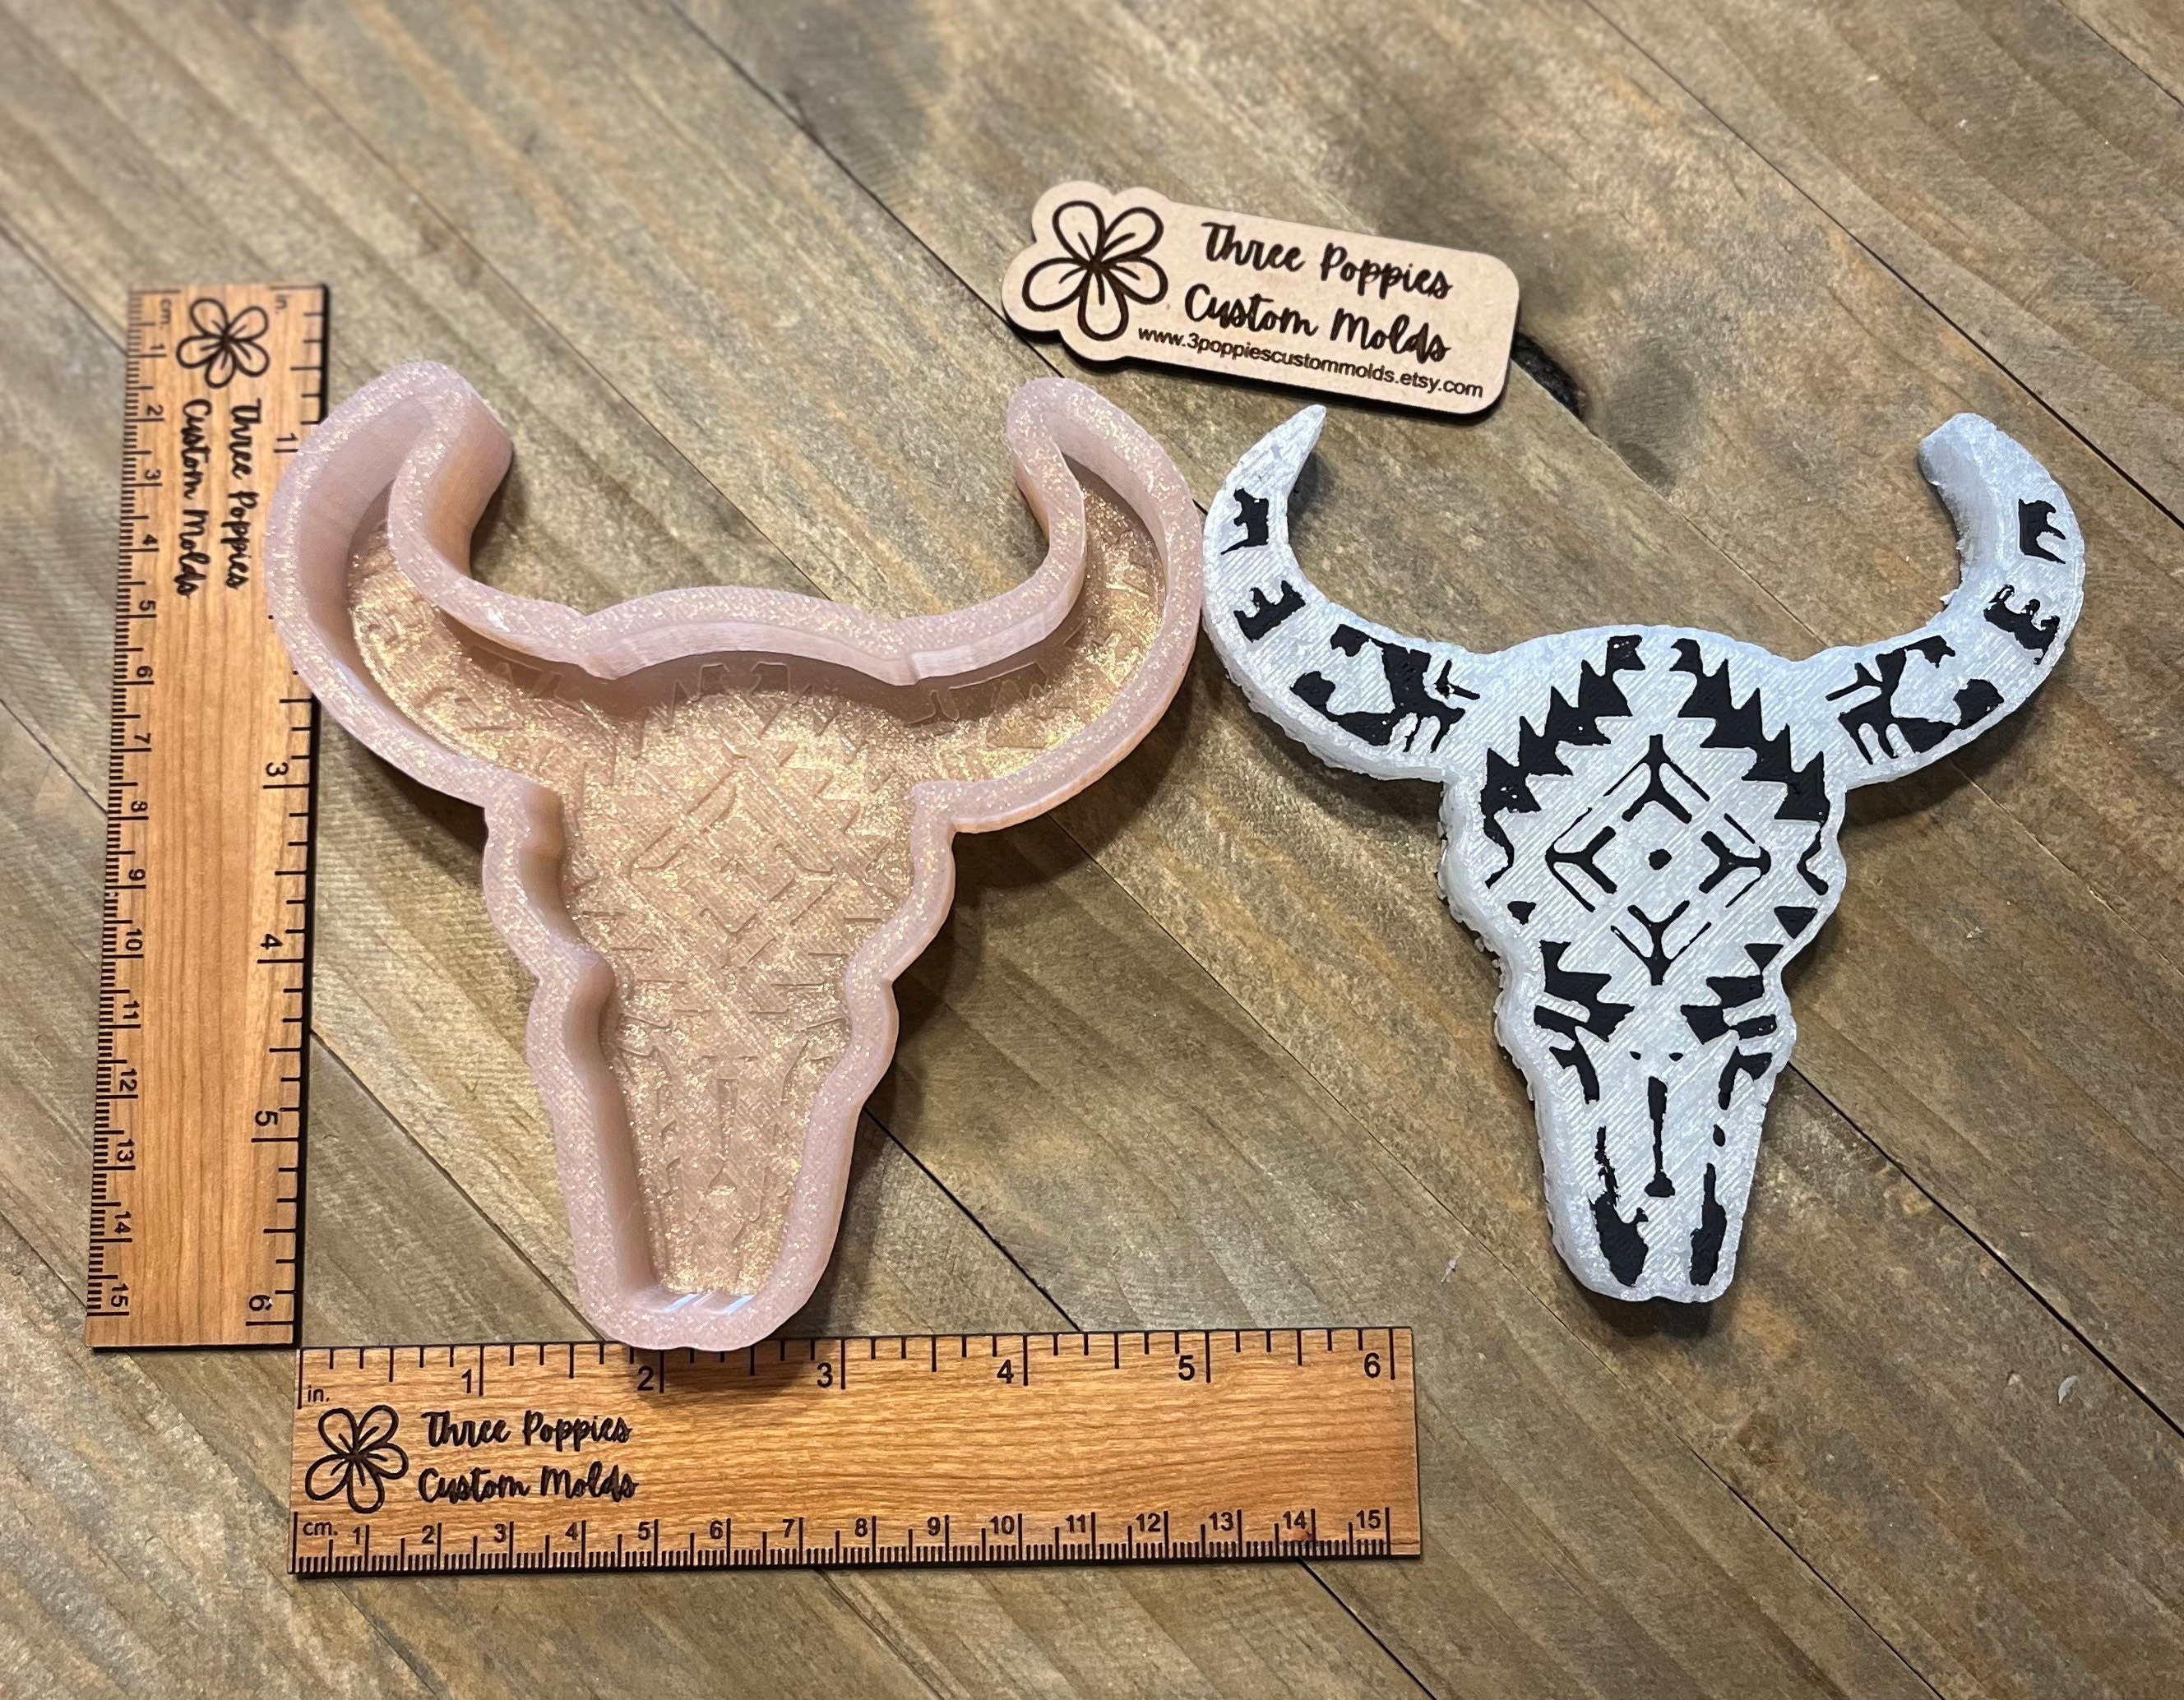 6 Longhorn Freshie Mold Silicone Tray Bulk Wholesale 11.25 Wide x 8 Long  x 1 Deep Multiple Mold for Freshies, Epoxy, Soap Aztec Bull Skull Clear  Freshie Heat Resistant Aroma Unscented Beads 